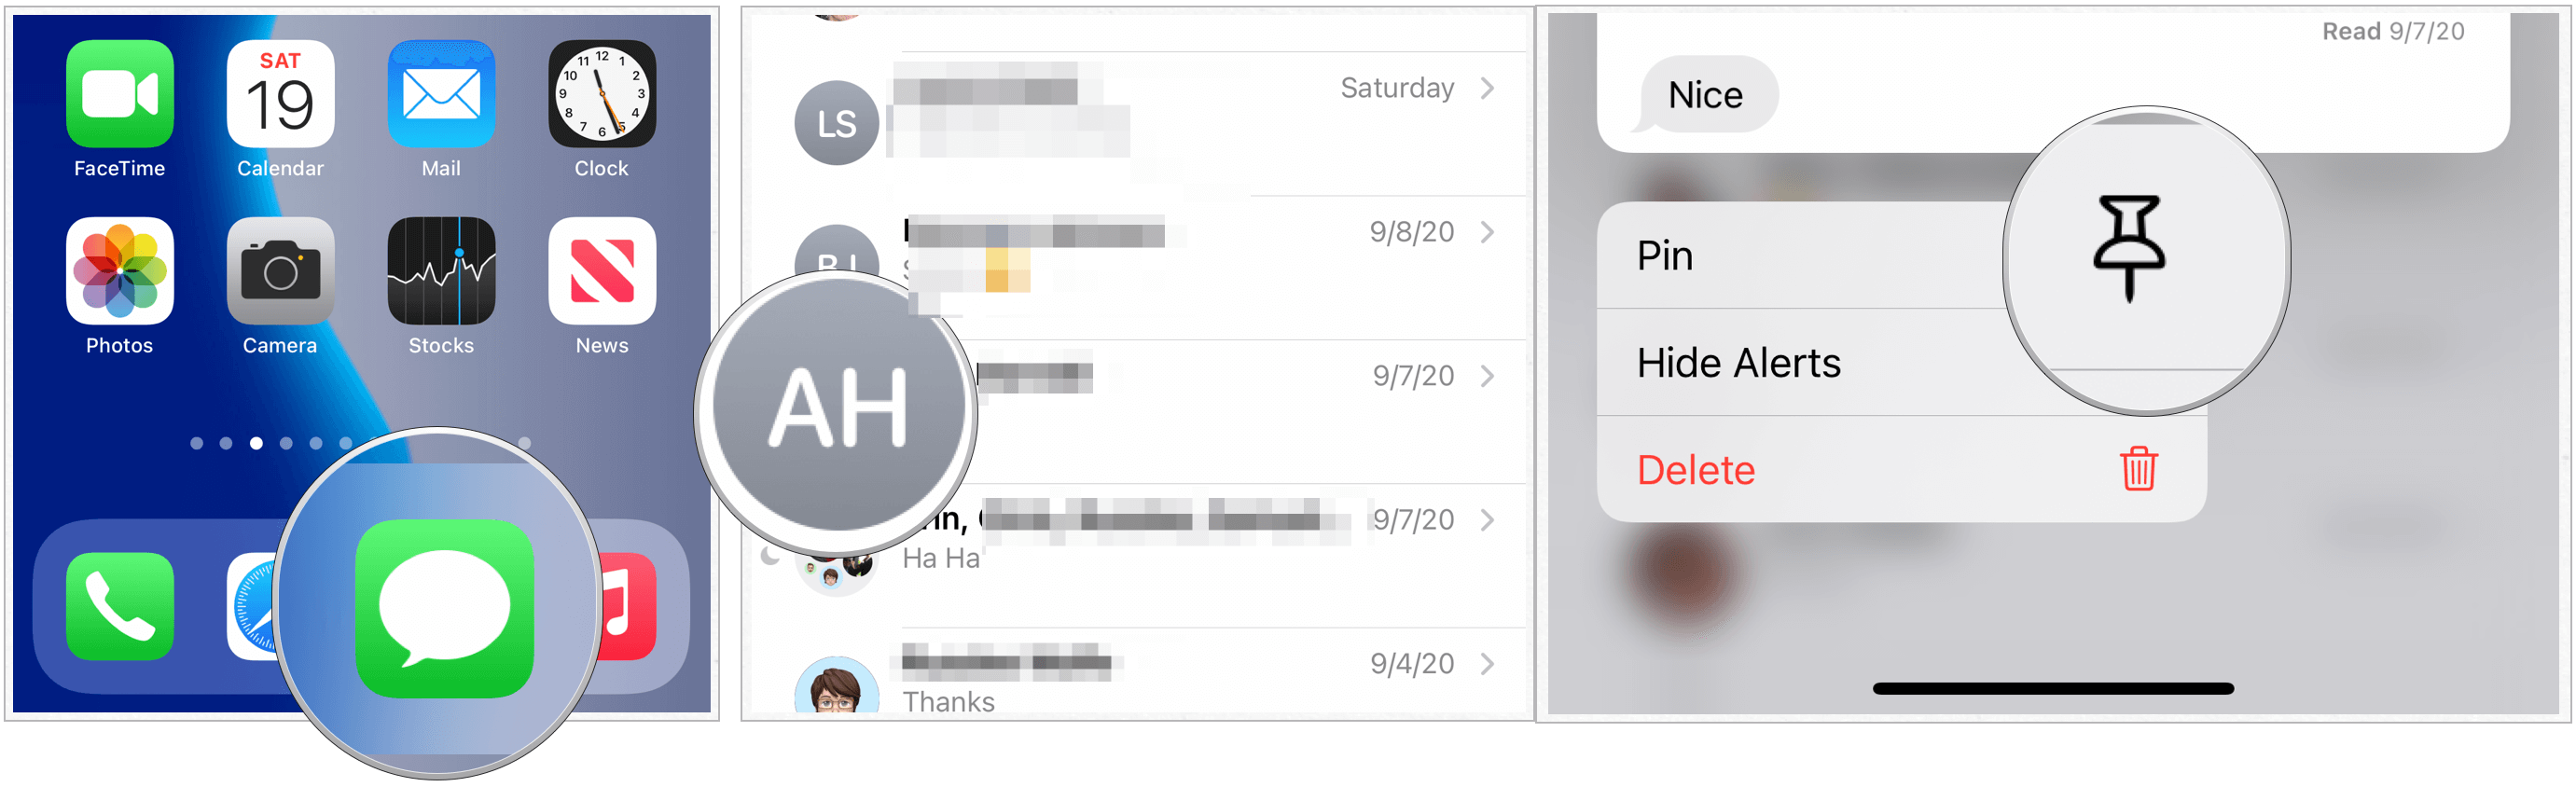 iPhone Messages Have Changed in iOS 14 - 53